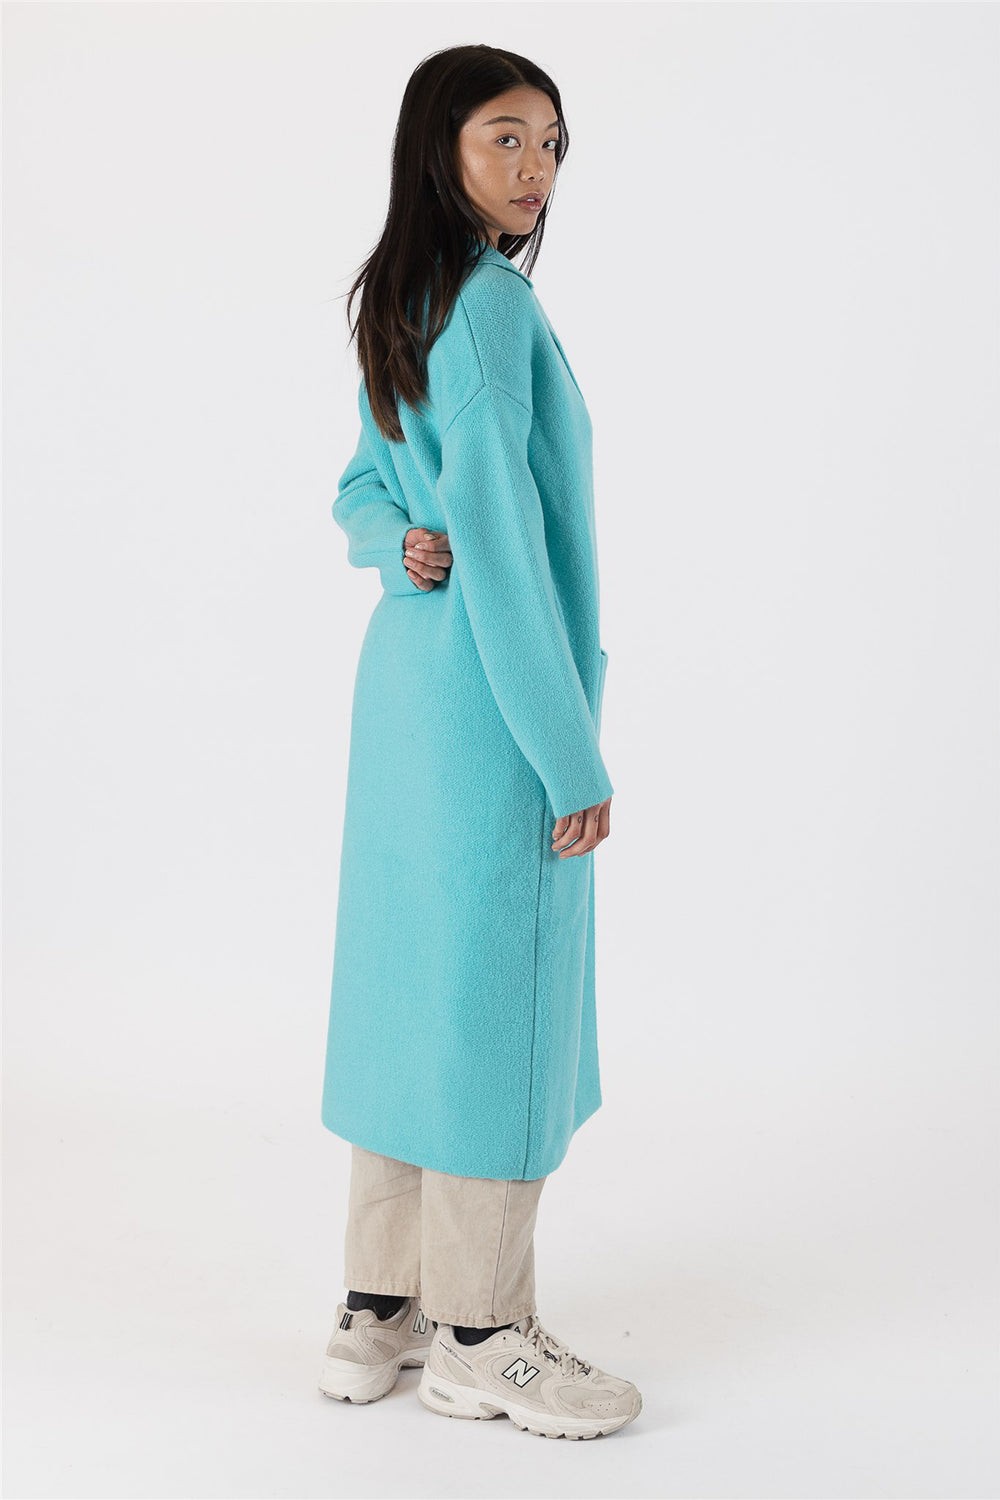 Lyla + Luxe Fiona Fitted Coat – honey